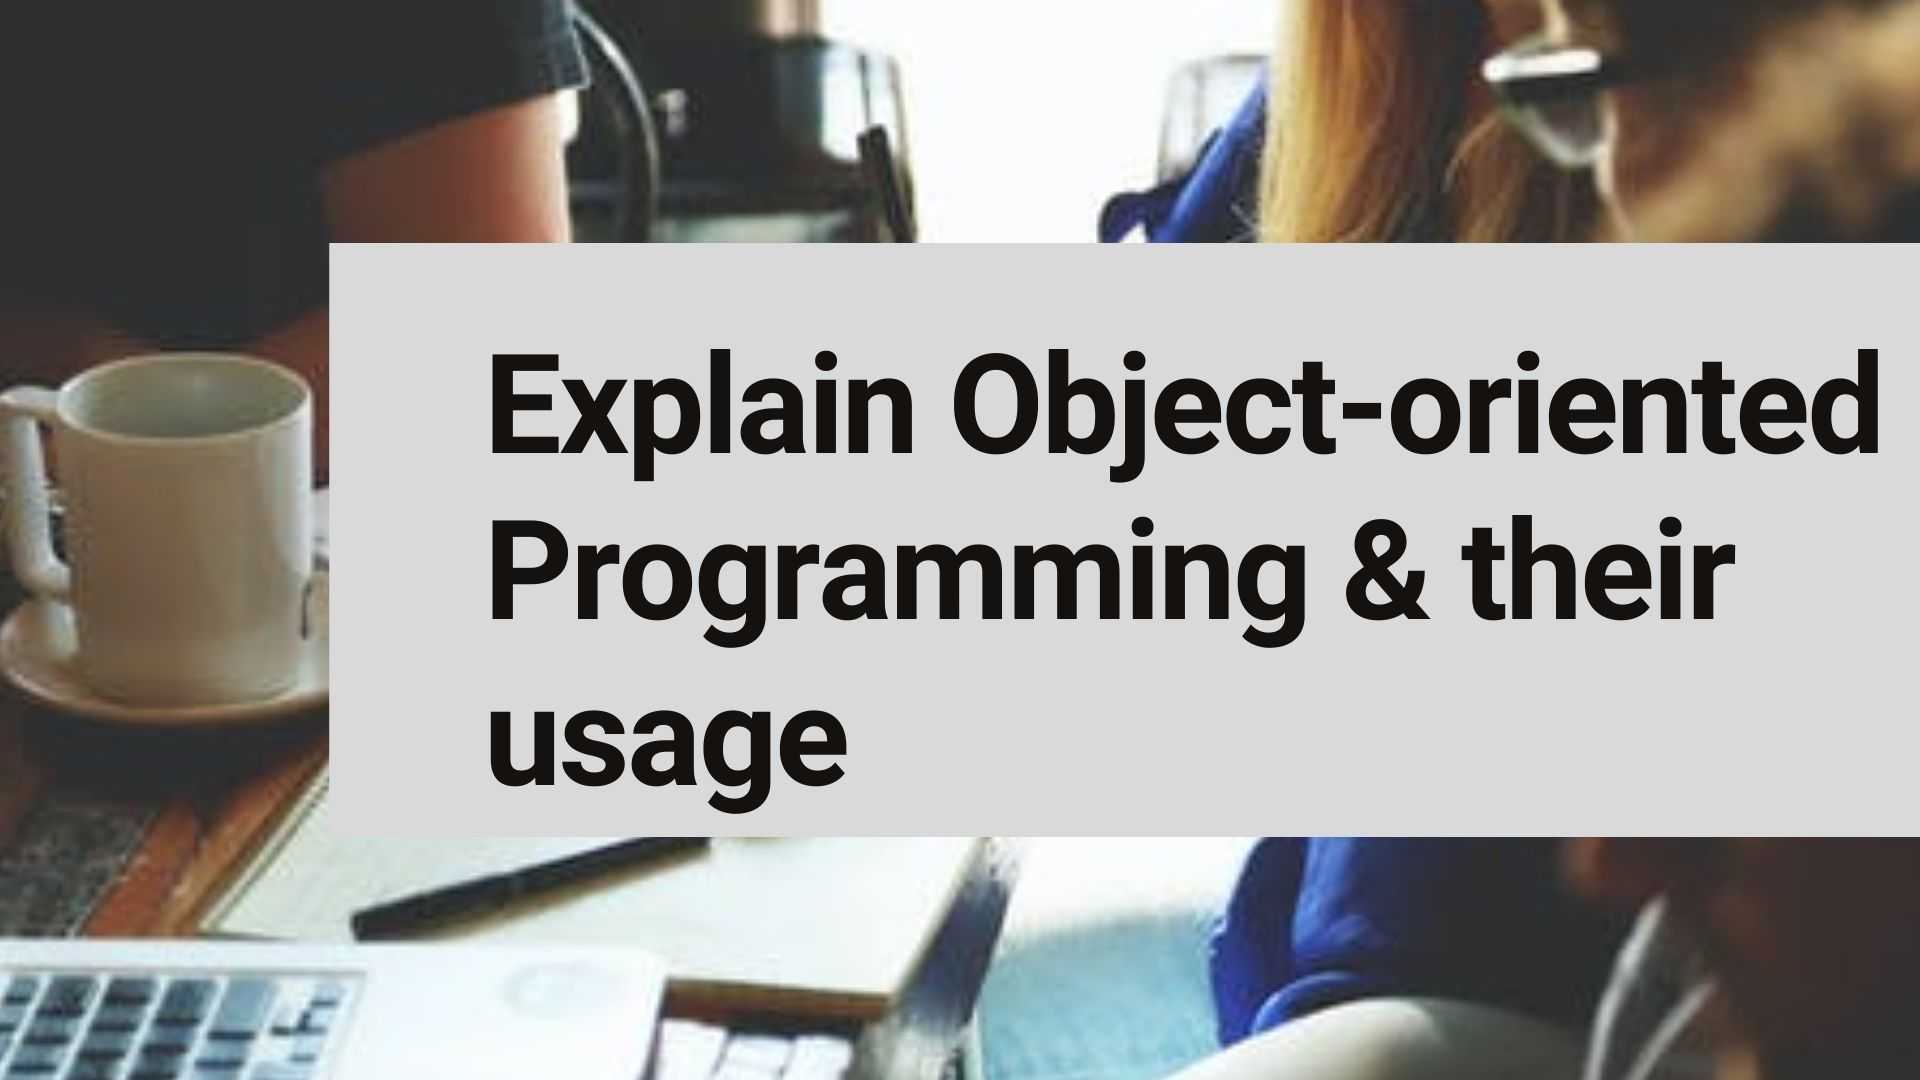 Object-oriented Programming